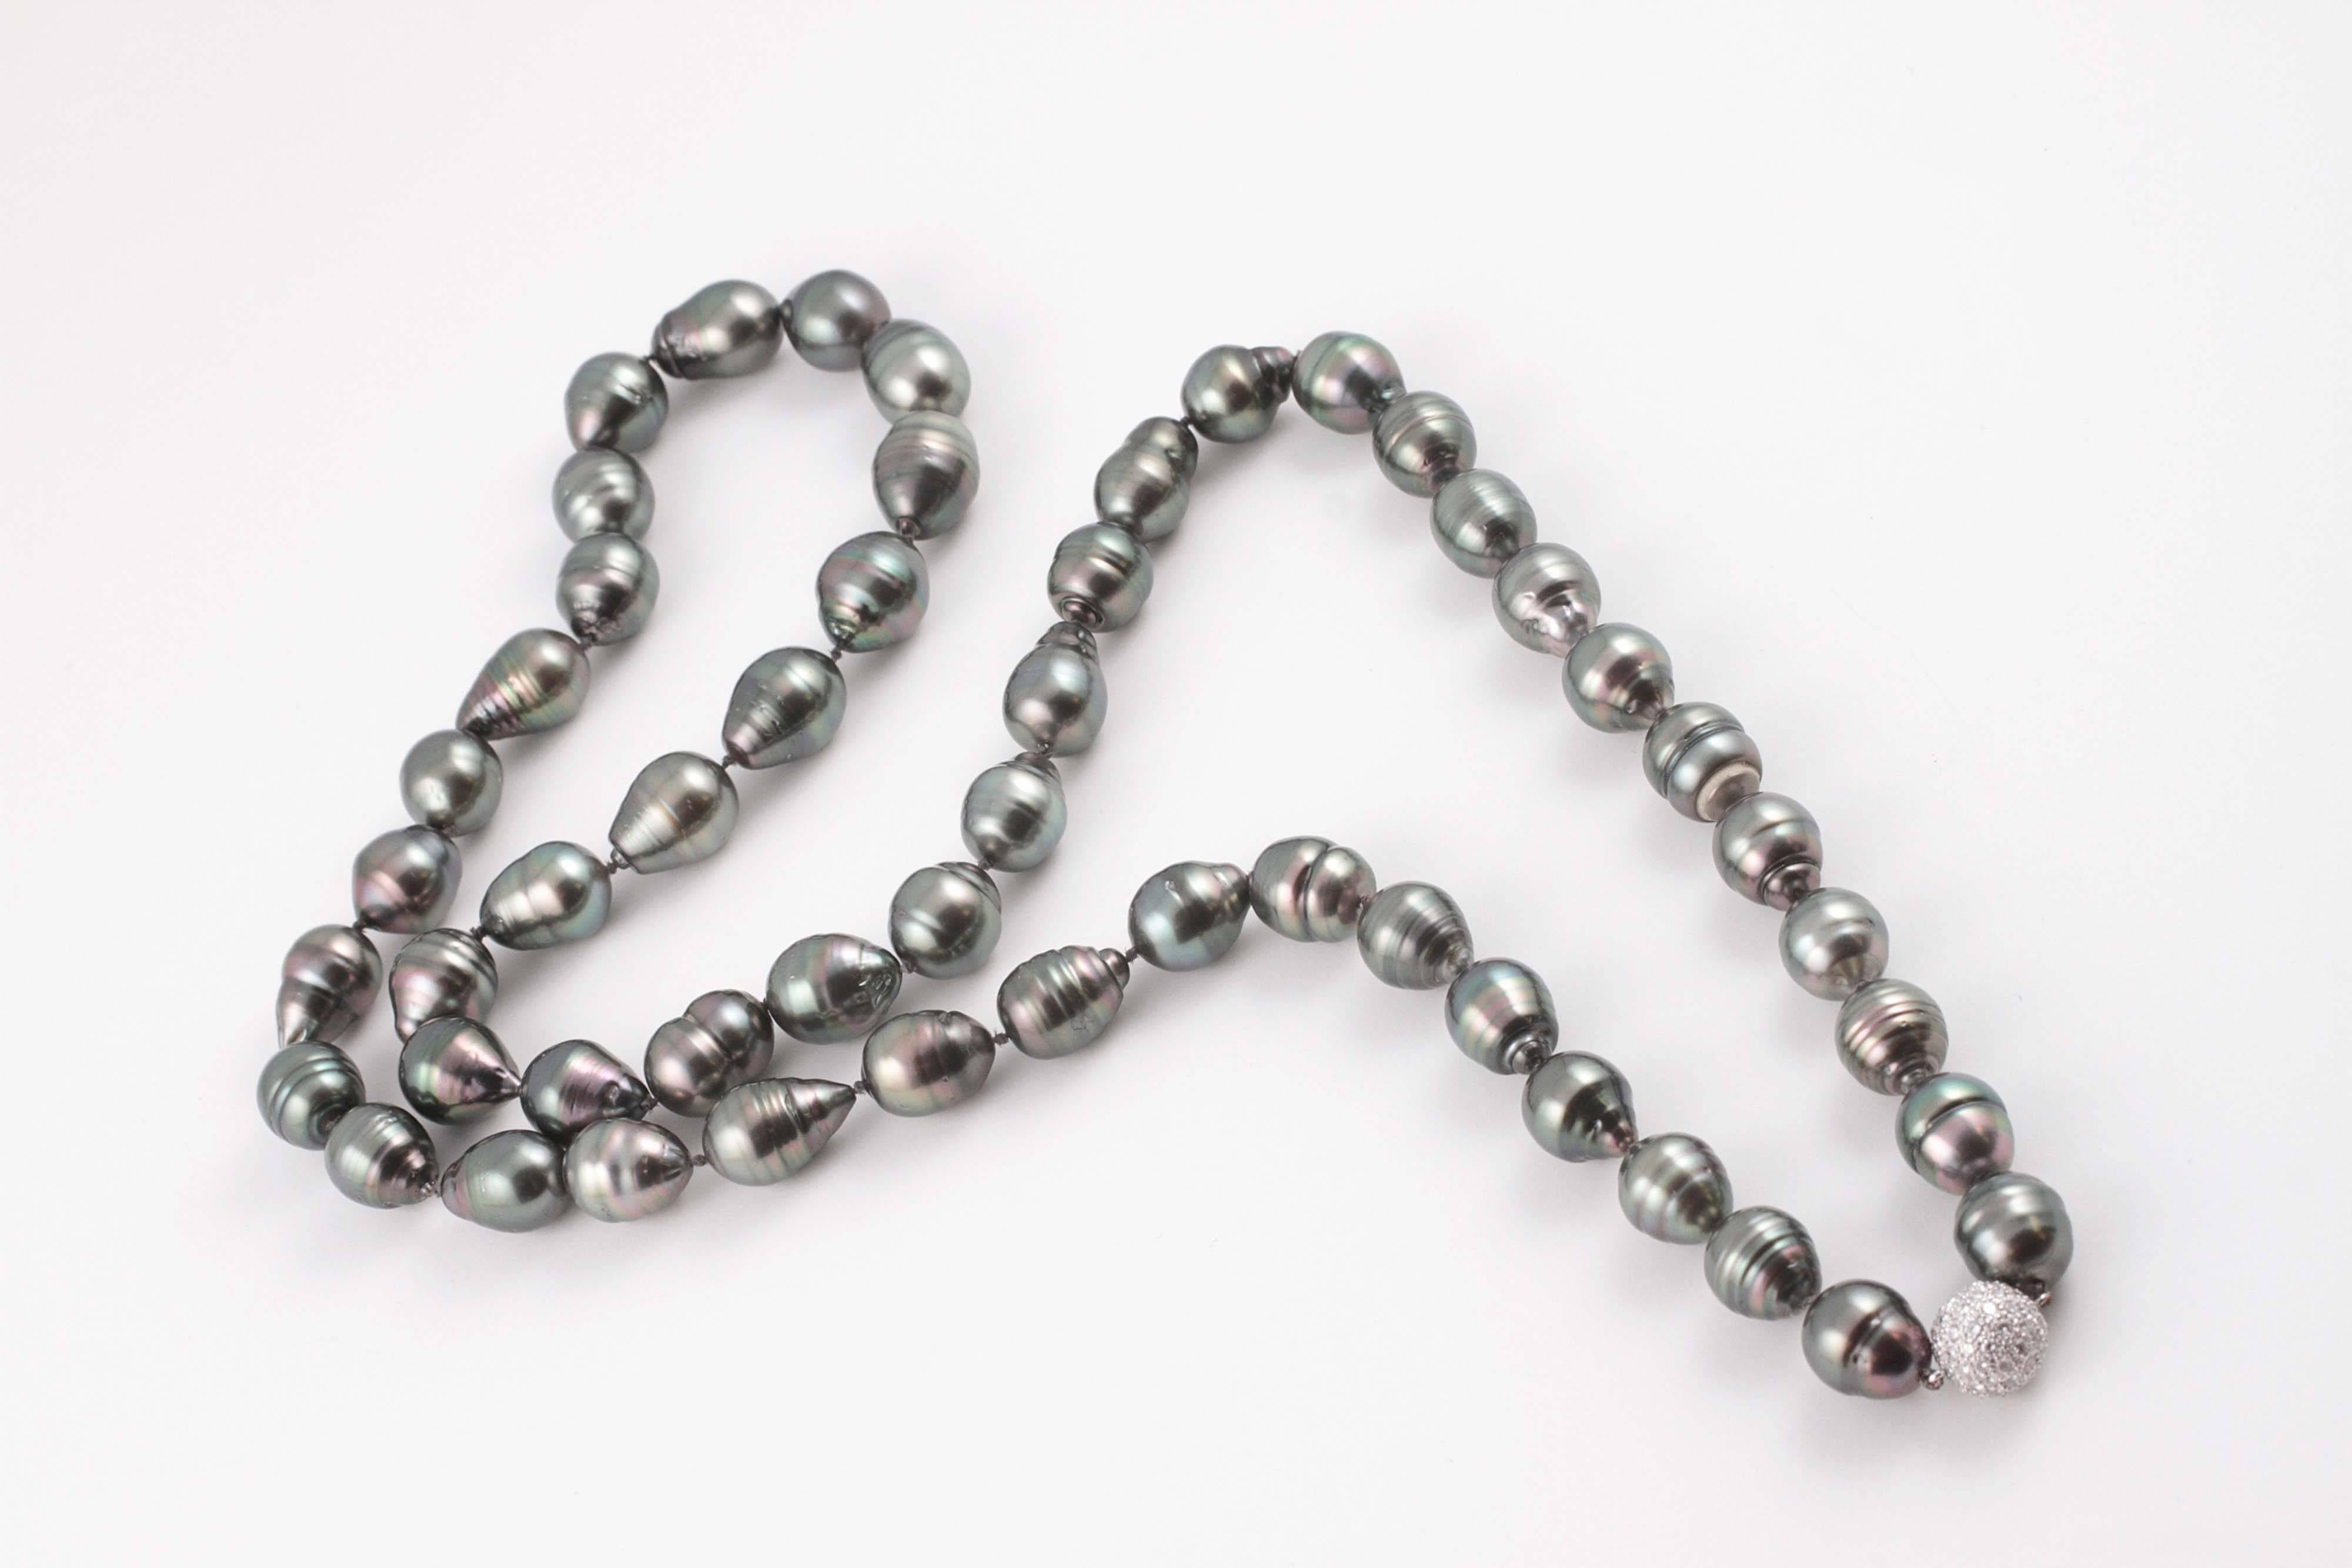 Beautiful baroque pearls in natural colors of gray and aubergine, they measure from 13.90 mm x 12.10 mm to 16.45 mm x 12.50 mm and the platinum ball clasp supports 2.00 cts of diamonds.